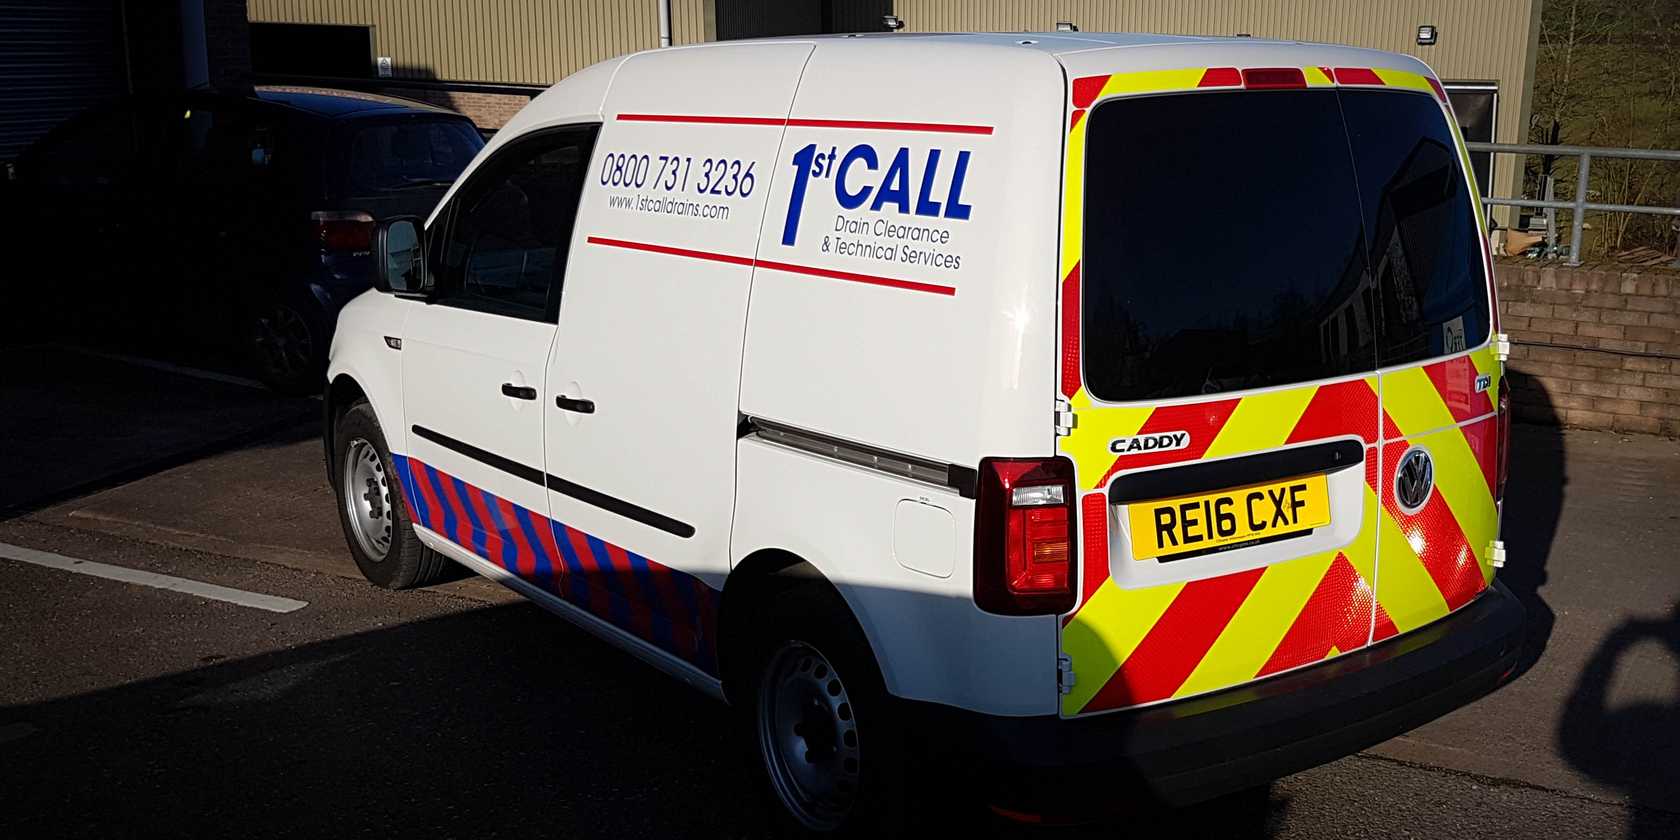 Vehicle Livery for 1st Call